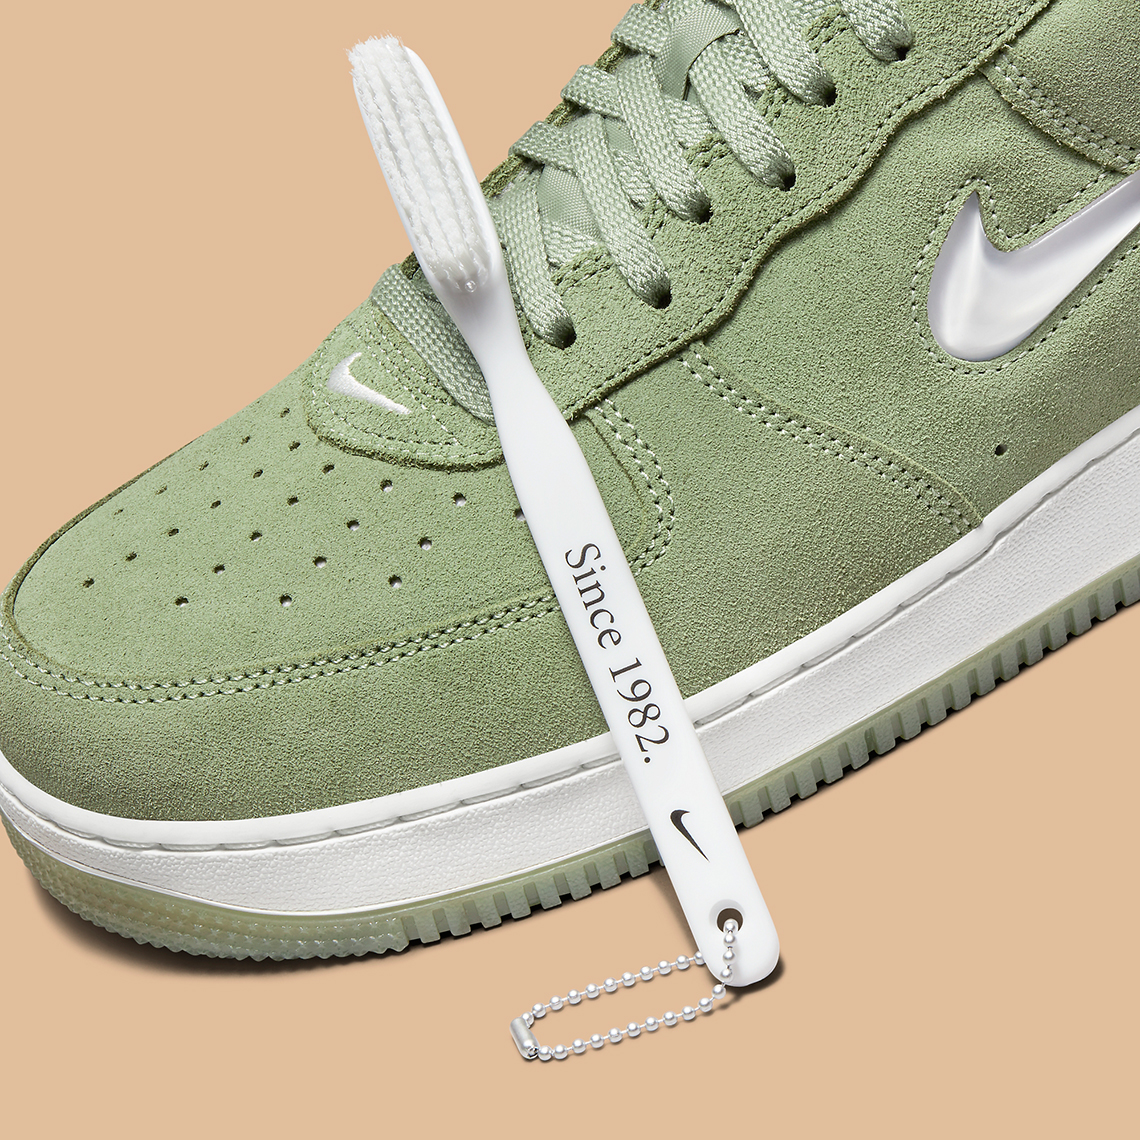 Nike Air Force 1 Low Green Suede Green DV0785-300